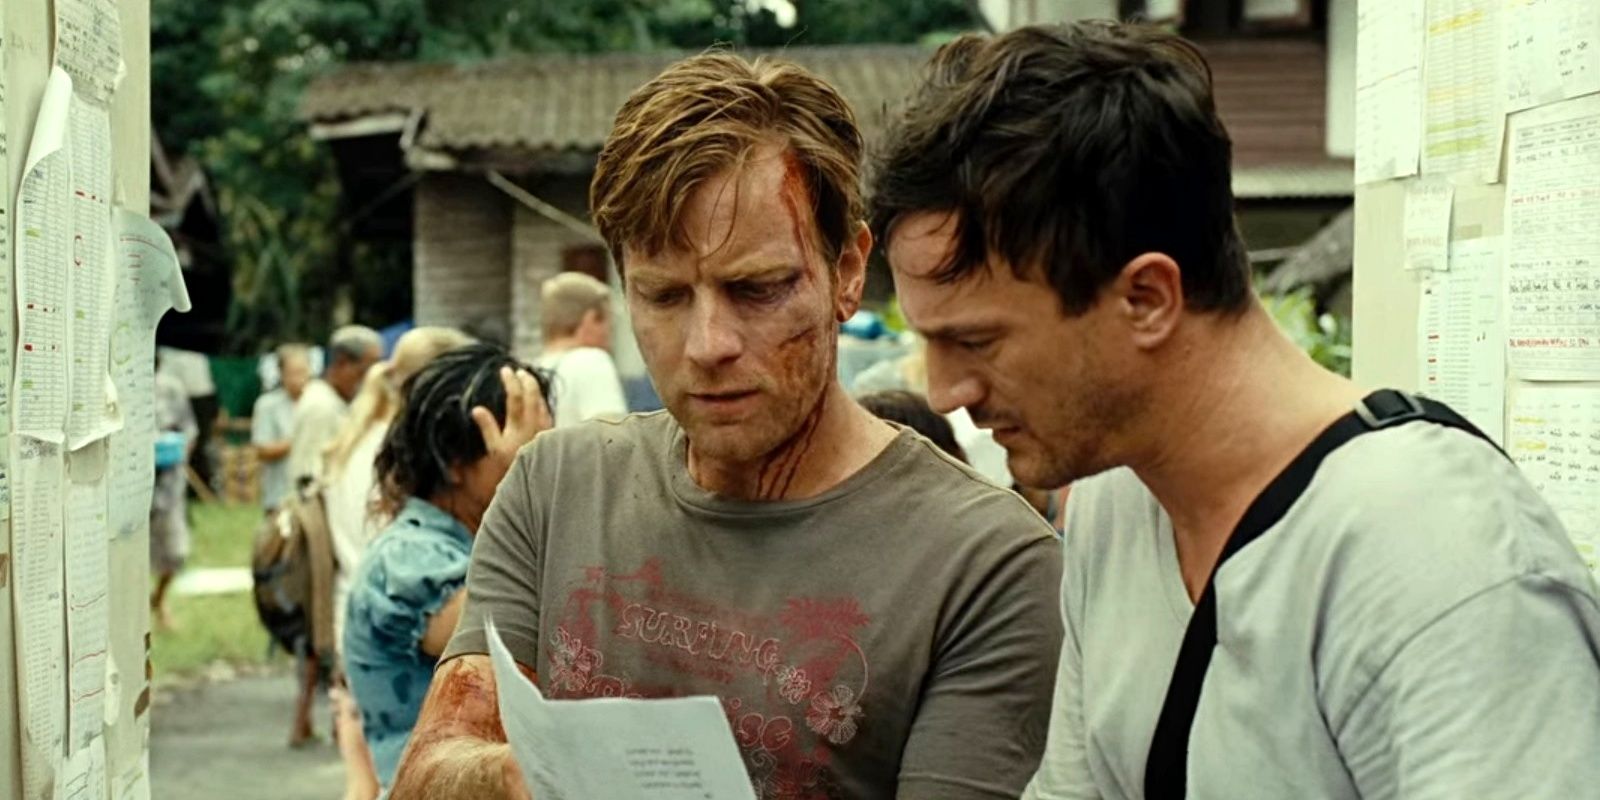 Ewan McGregor as Henry and Sönke Möhring as Karl in The Impossible.